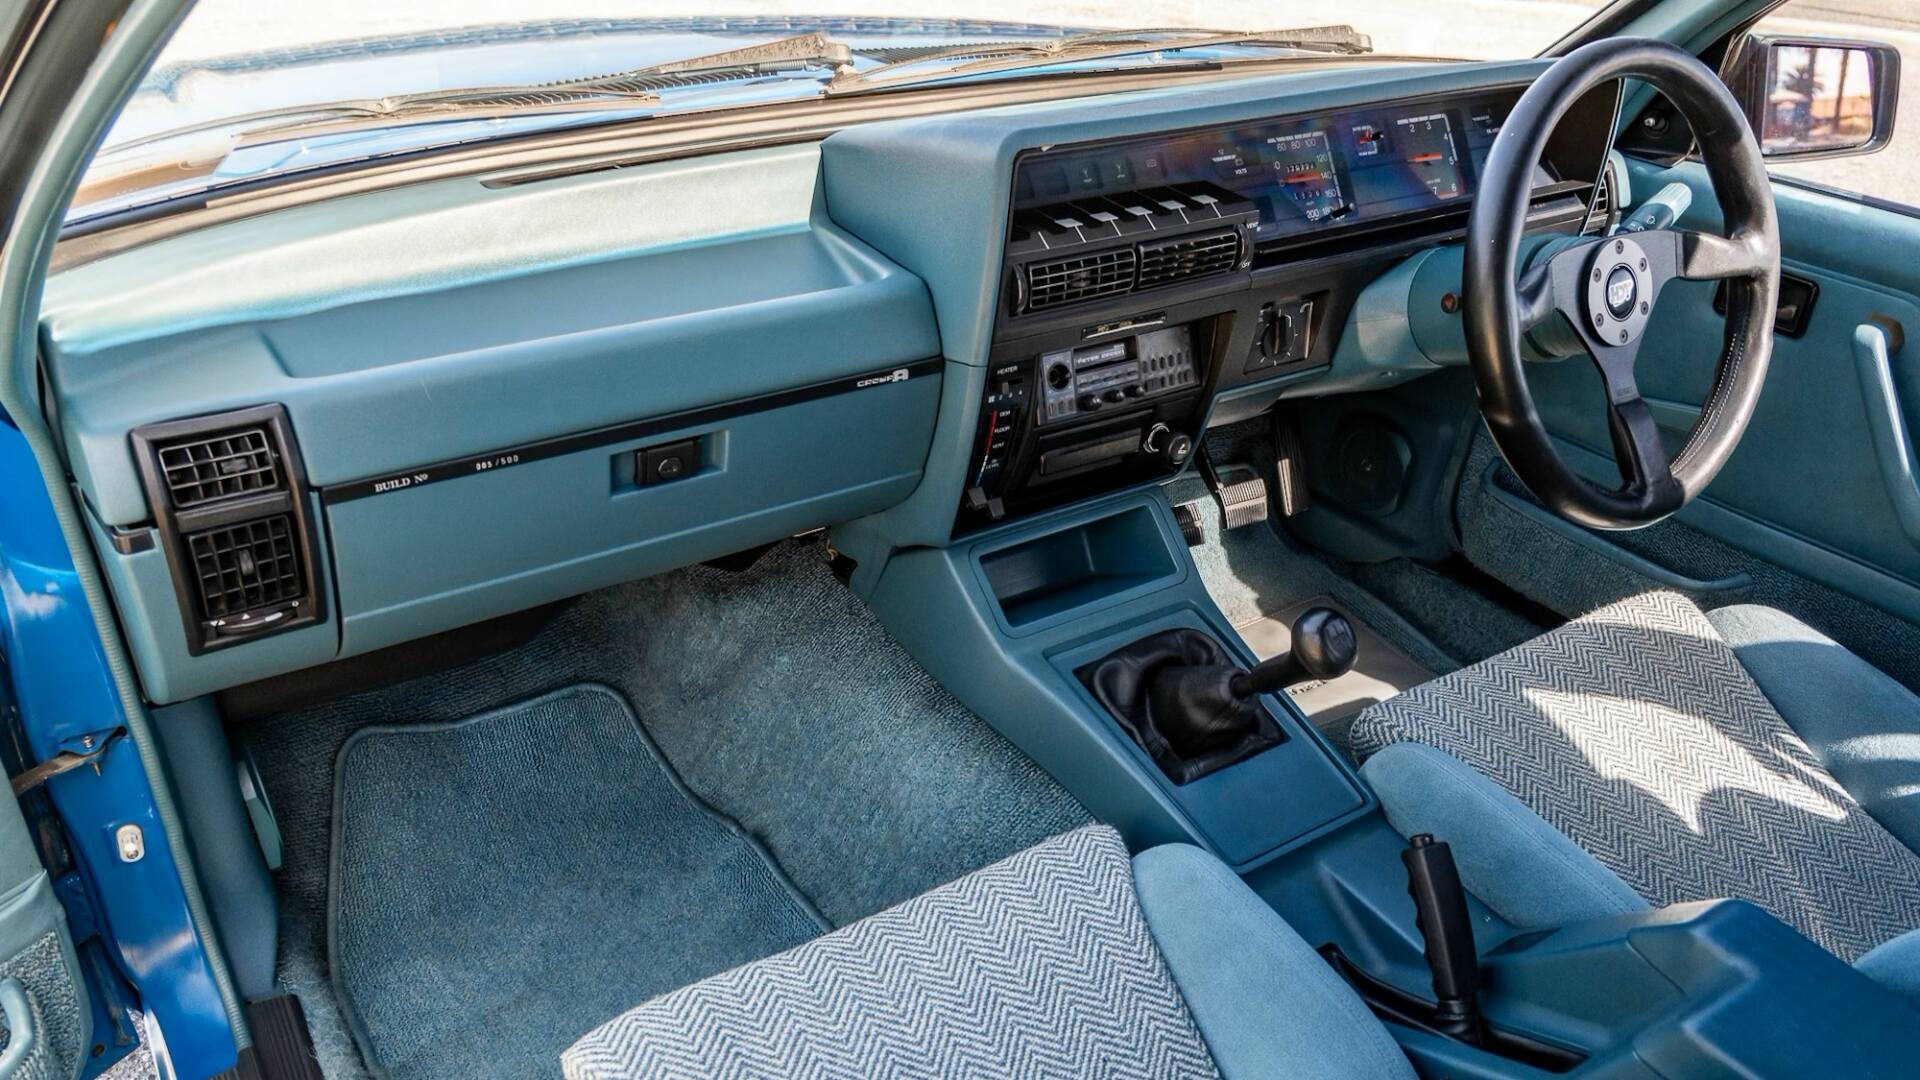 The Interior, Steering, Dashboard, And Central Console Of The Holden Commodore VK (Credits Collecting Cars)